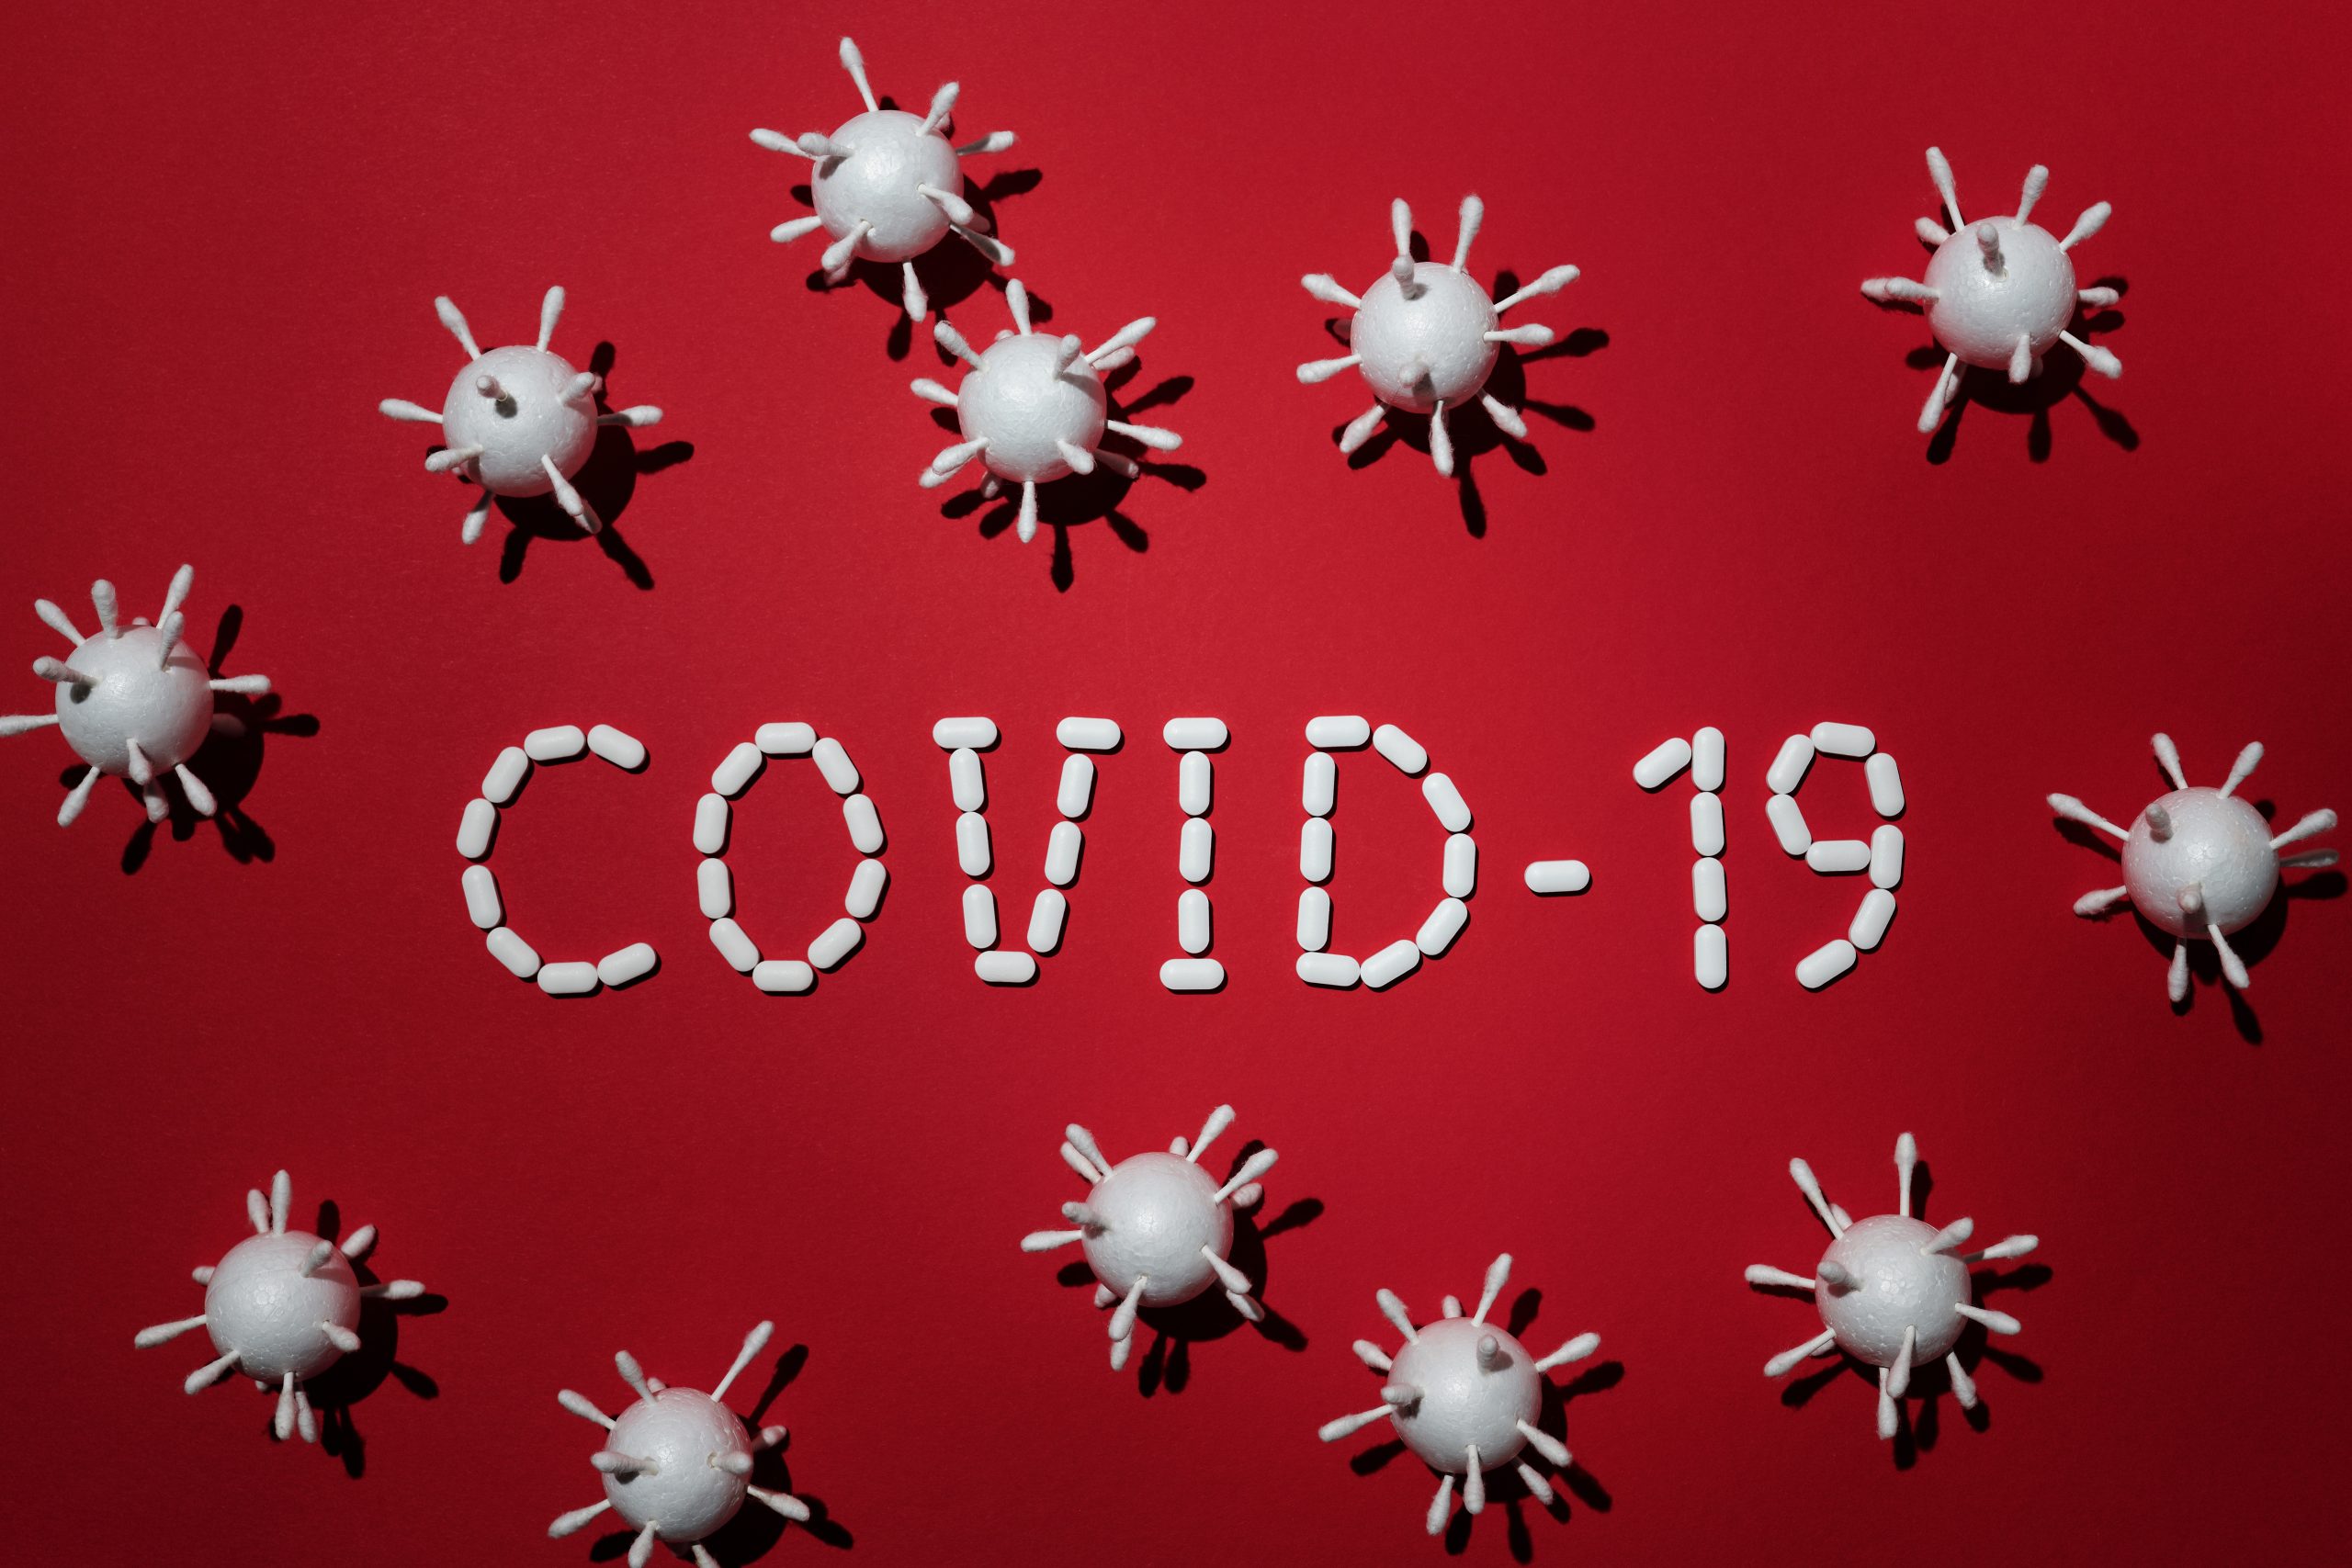 All State-Run COVID-19 Testing Sites Being Shut Down In NH